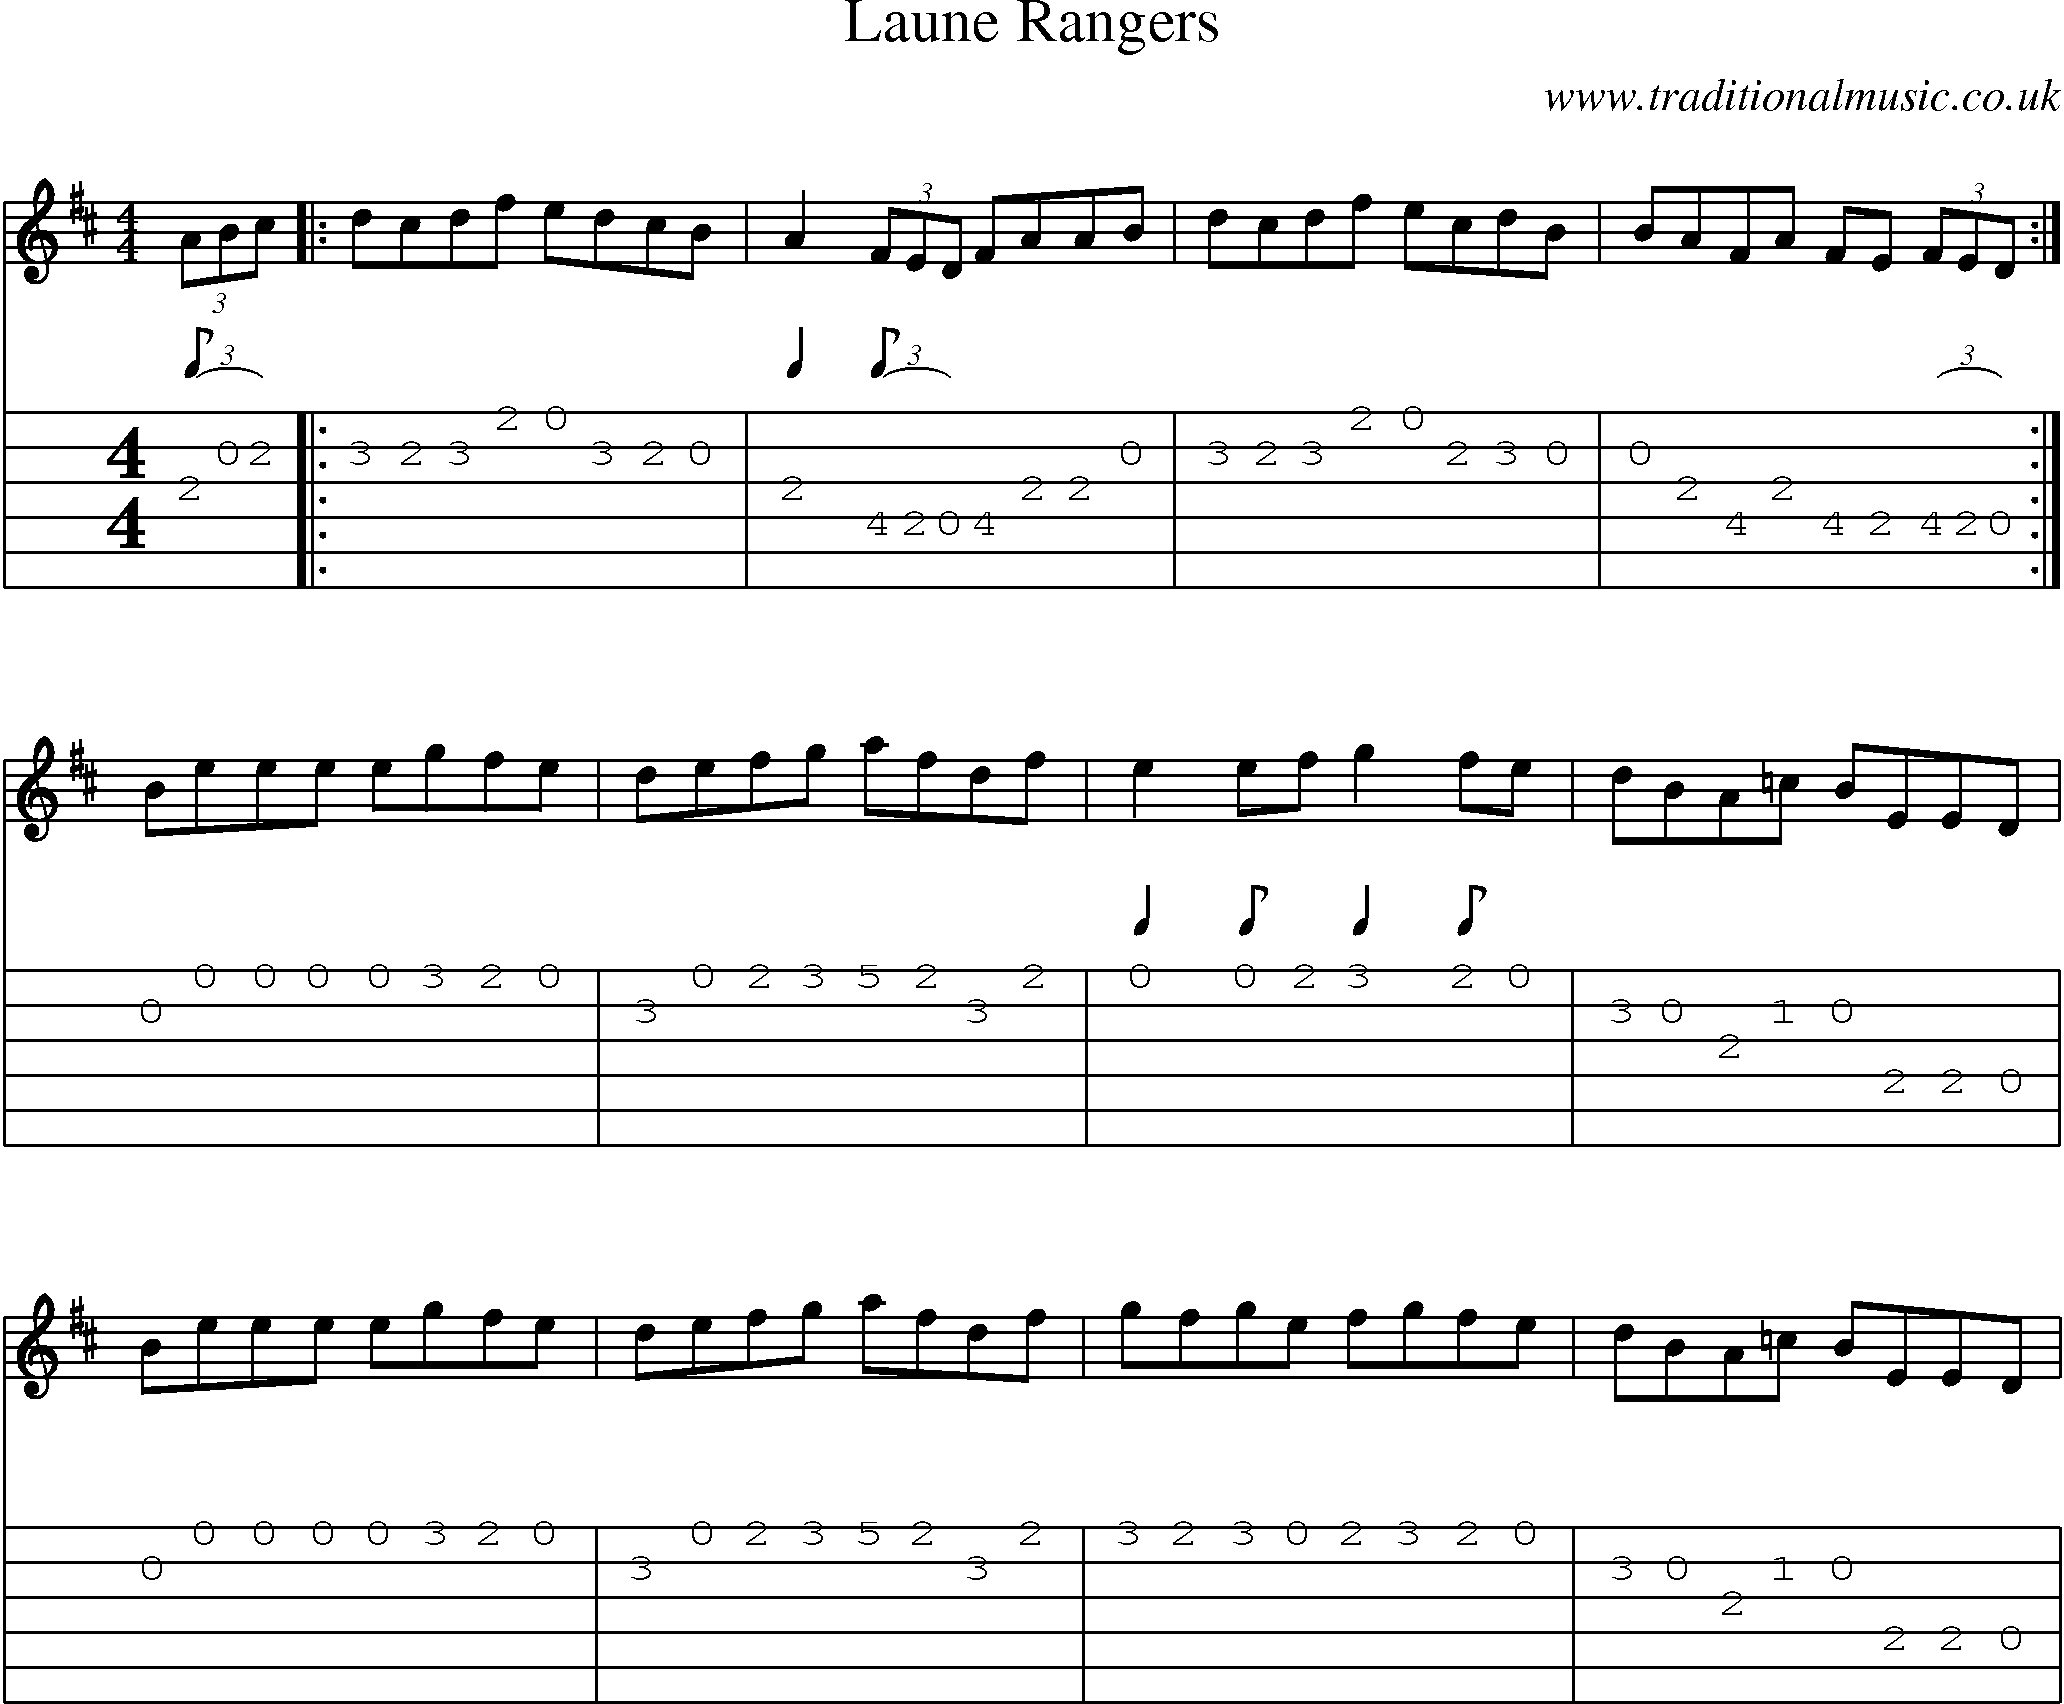 Music Score and Guitar Tabs for Laune Rangers